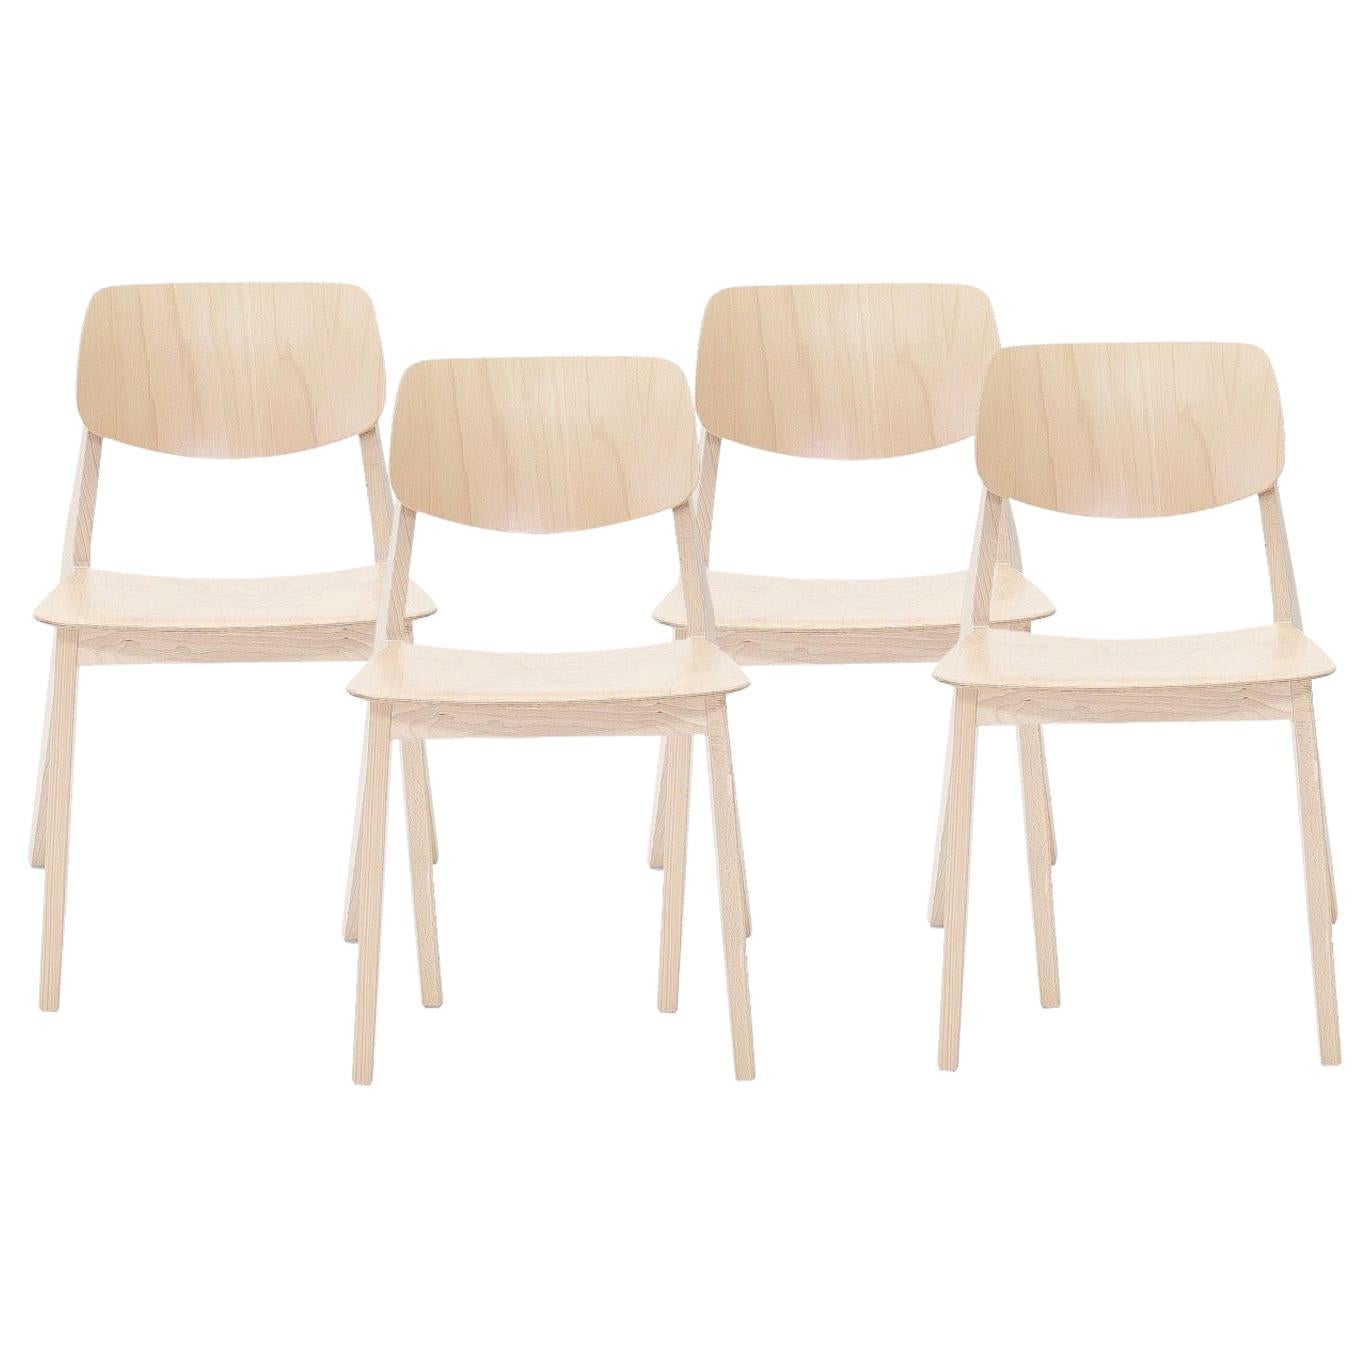 Felber C14 Wood Chairs by Dietiker, Exchangeable Back and Seat, Set of 4